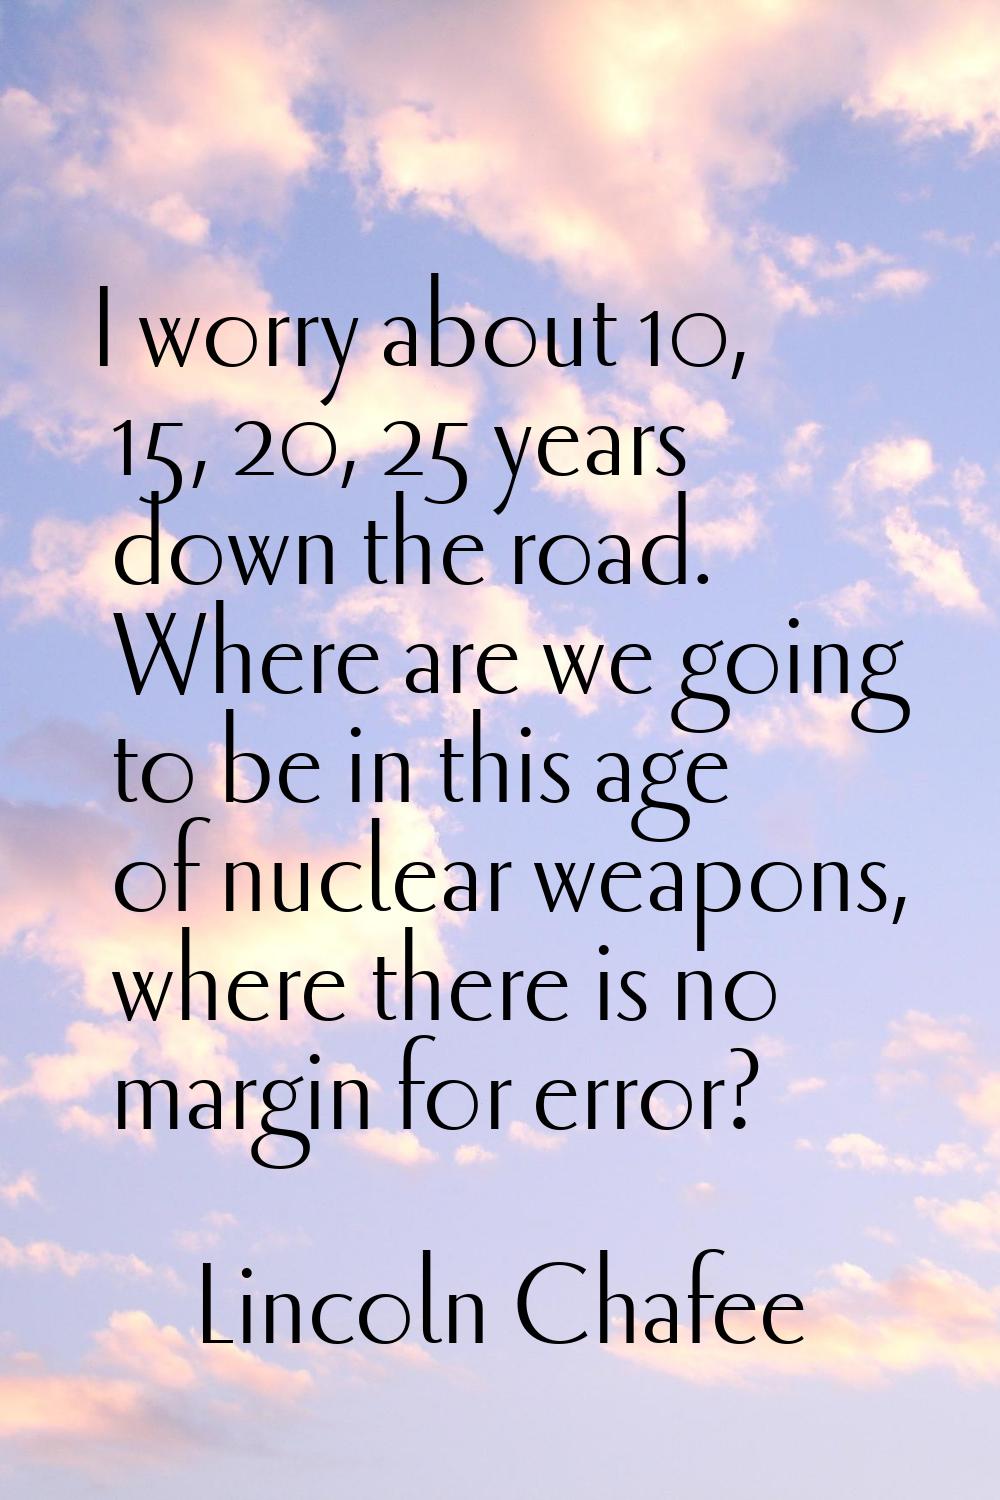 I worry about 10, 15, 20, 25 years down the road. Where are we going to be in this age of nuclear w